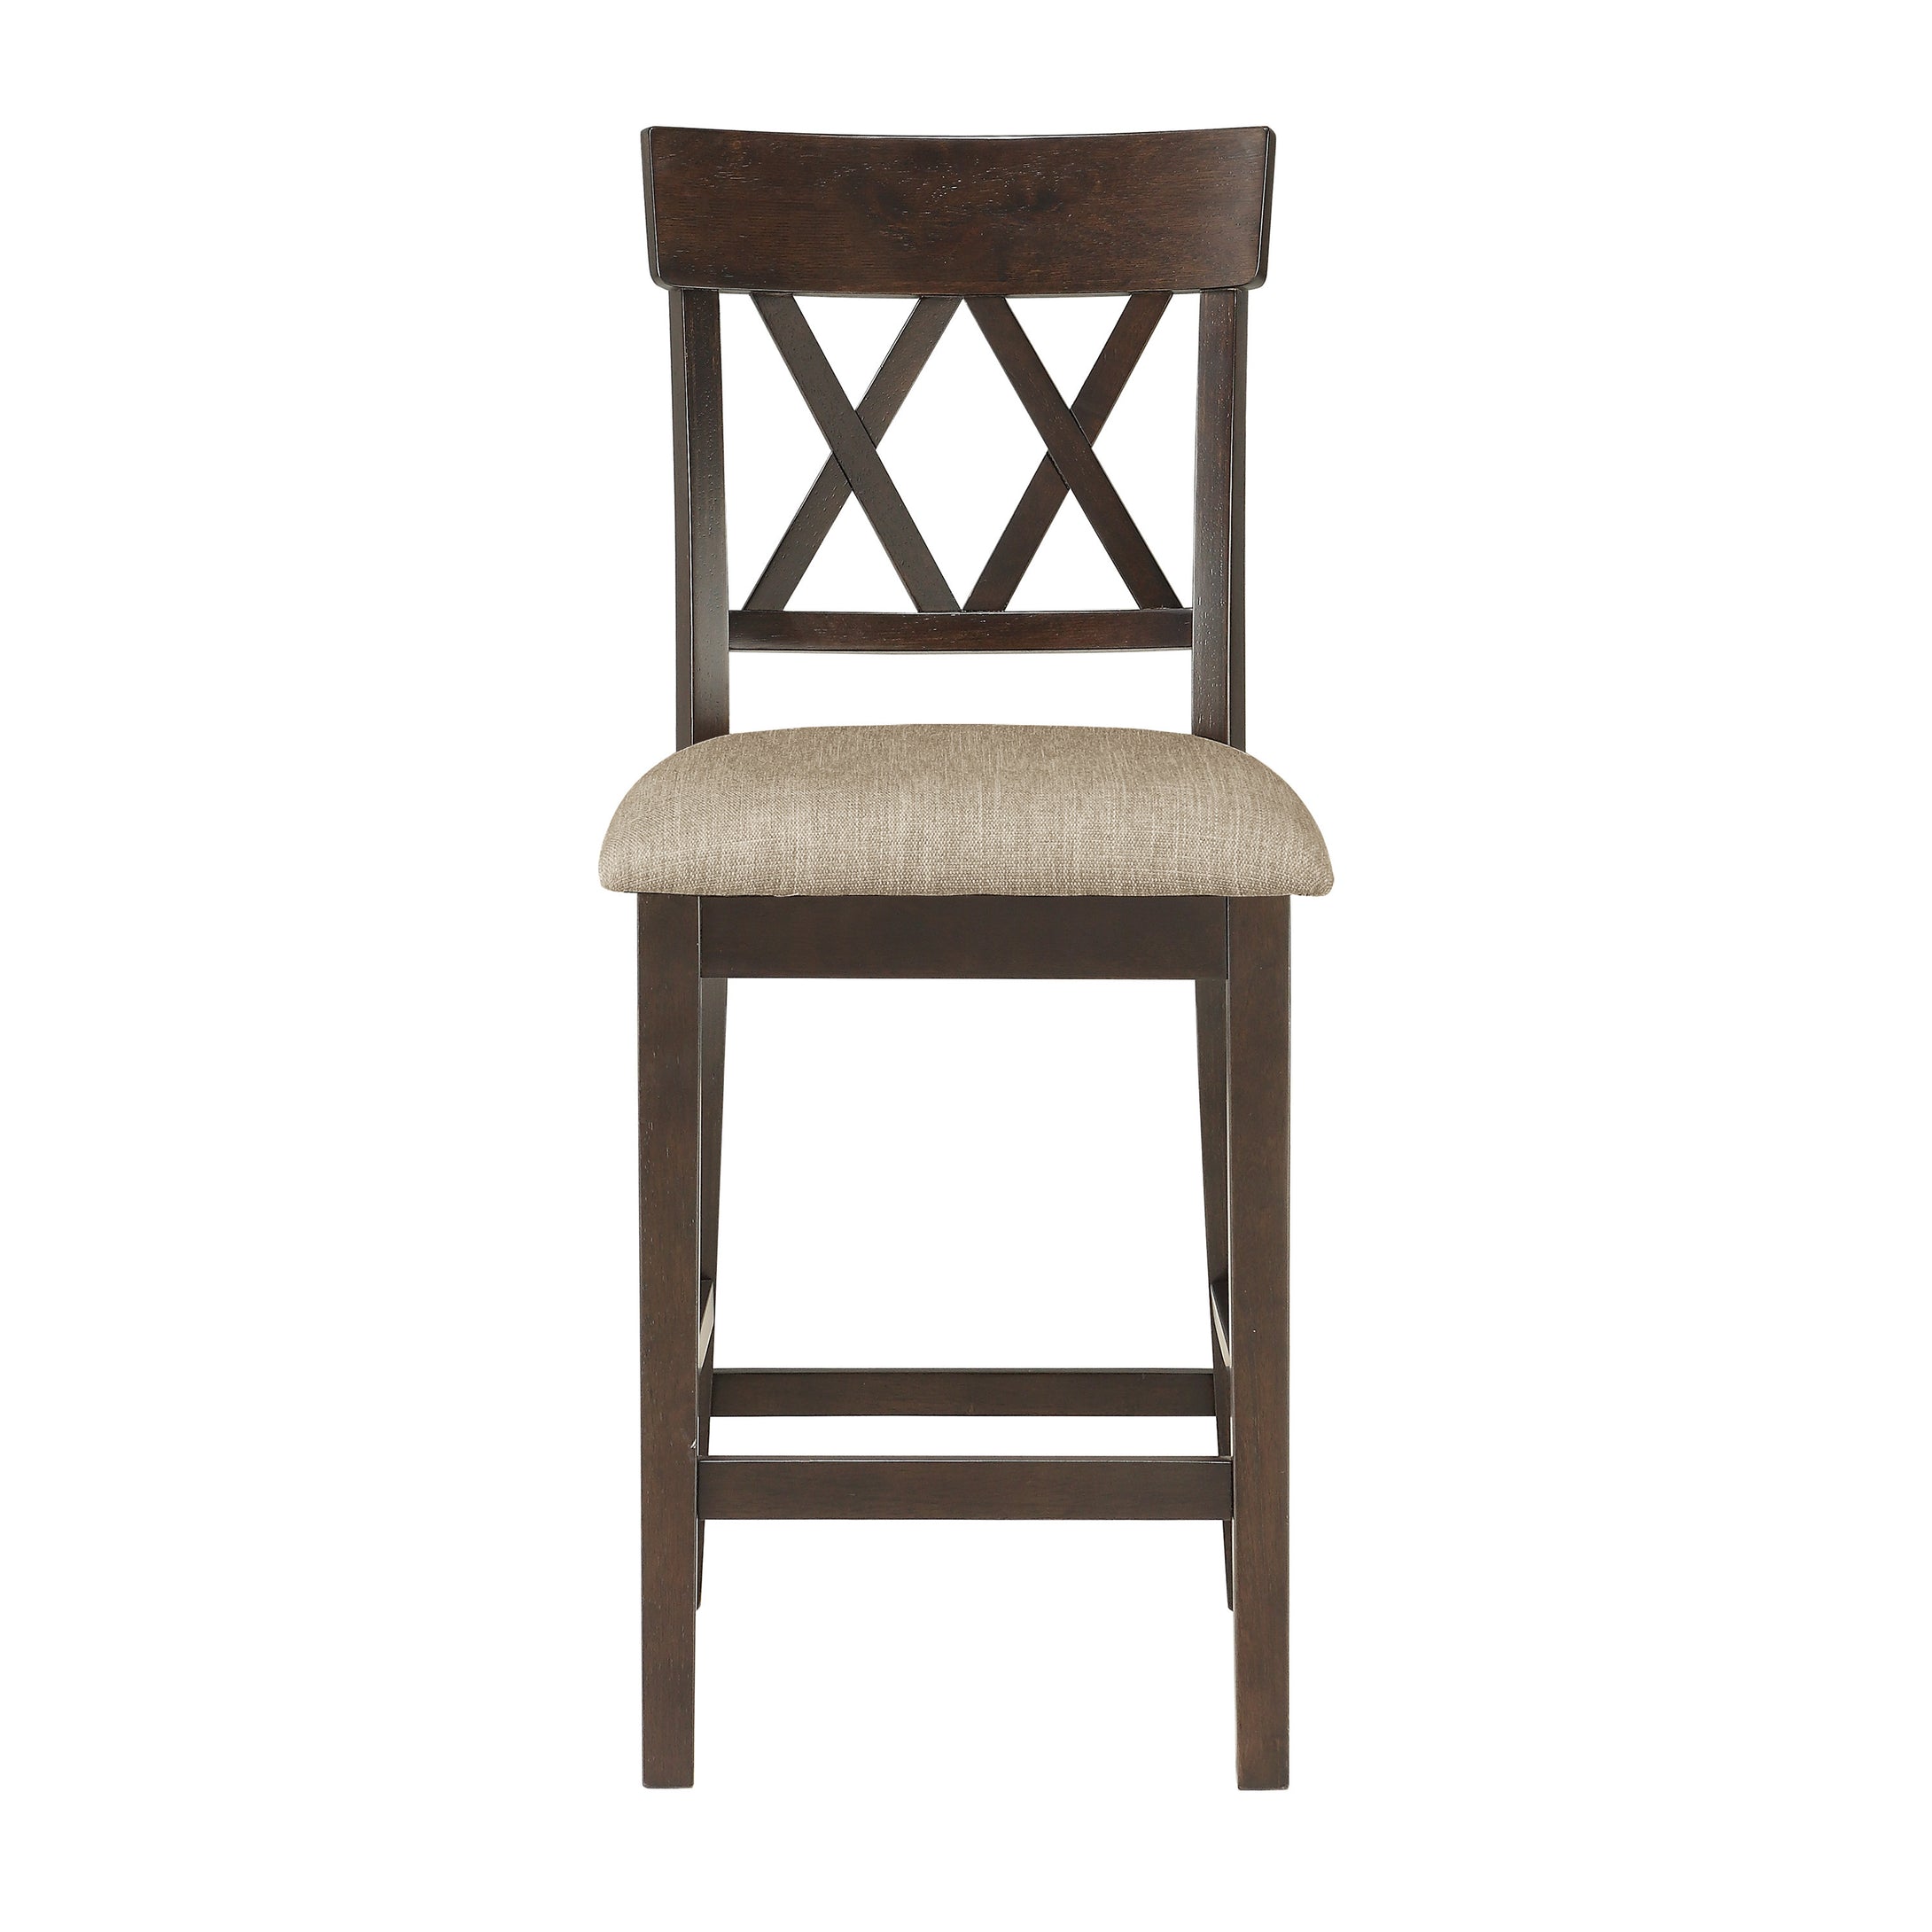 5716-24S2 Counter Height Chair, Double X Back